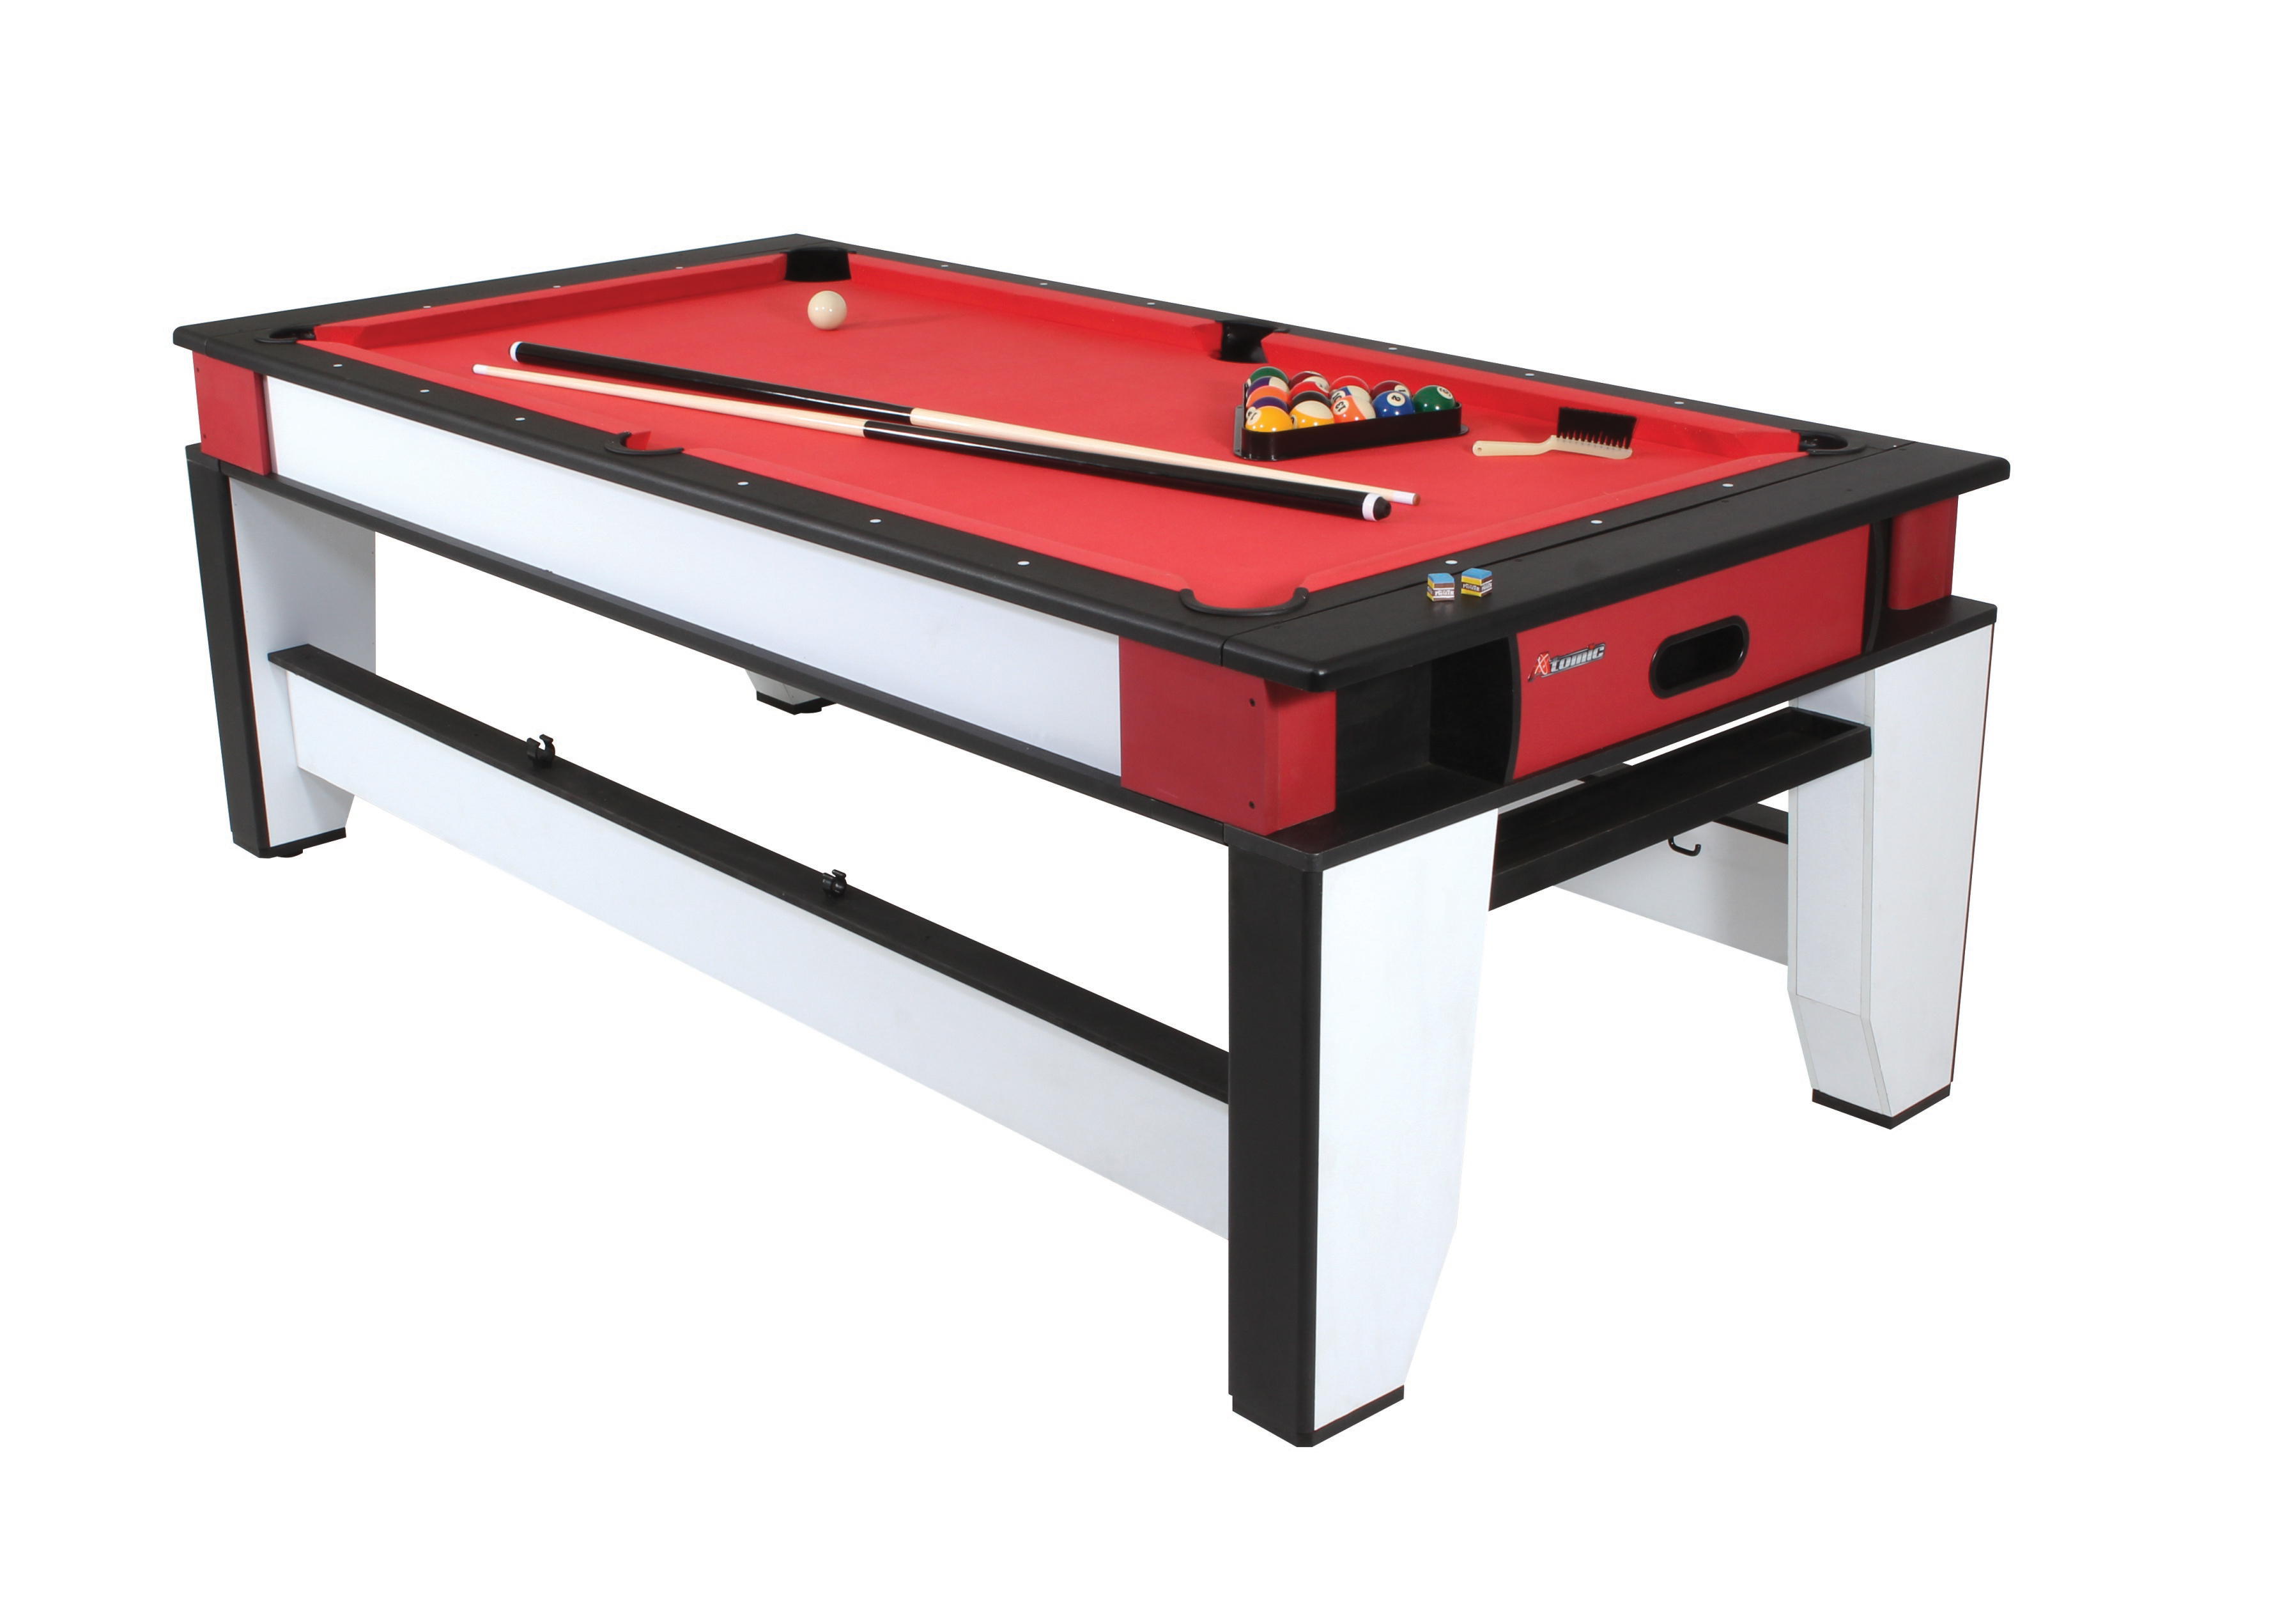 Atomic Games Escalade Sports 84 2 In 1 Flip Top Table 9 01 Off